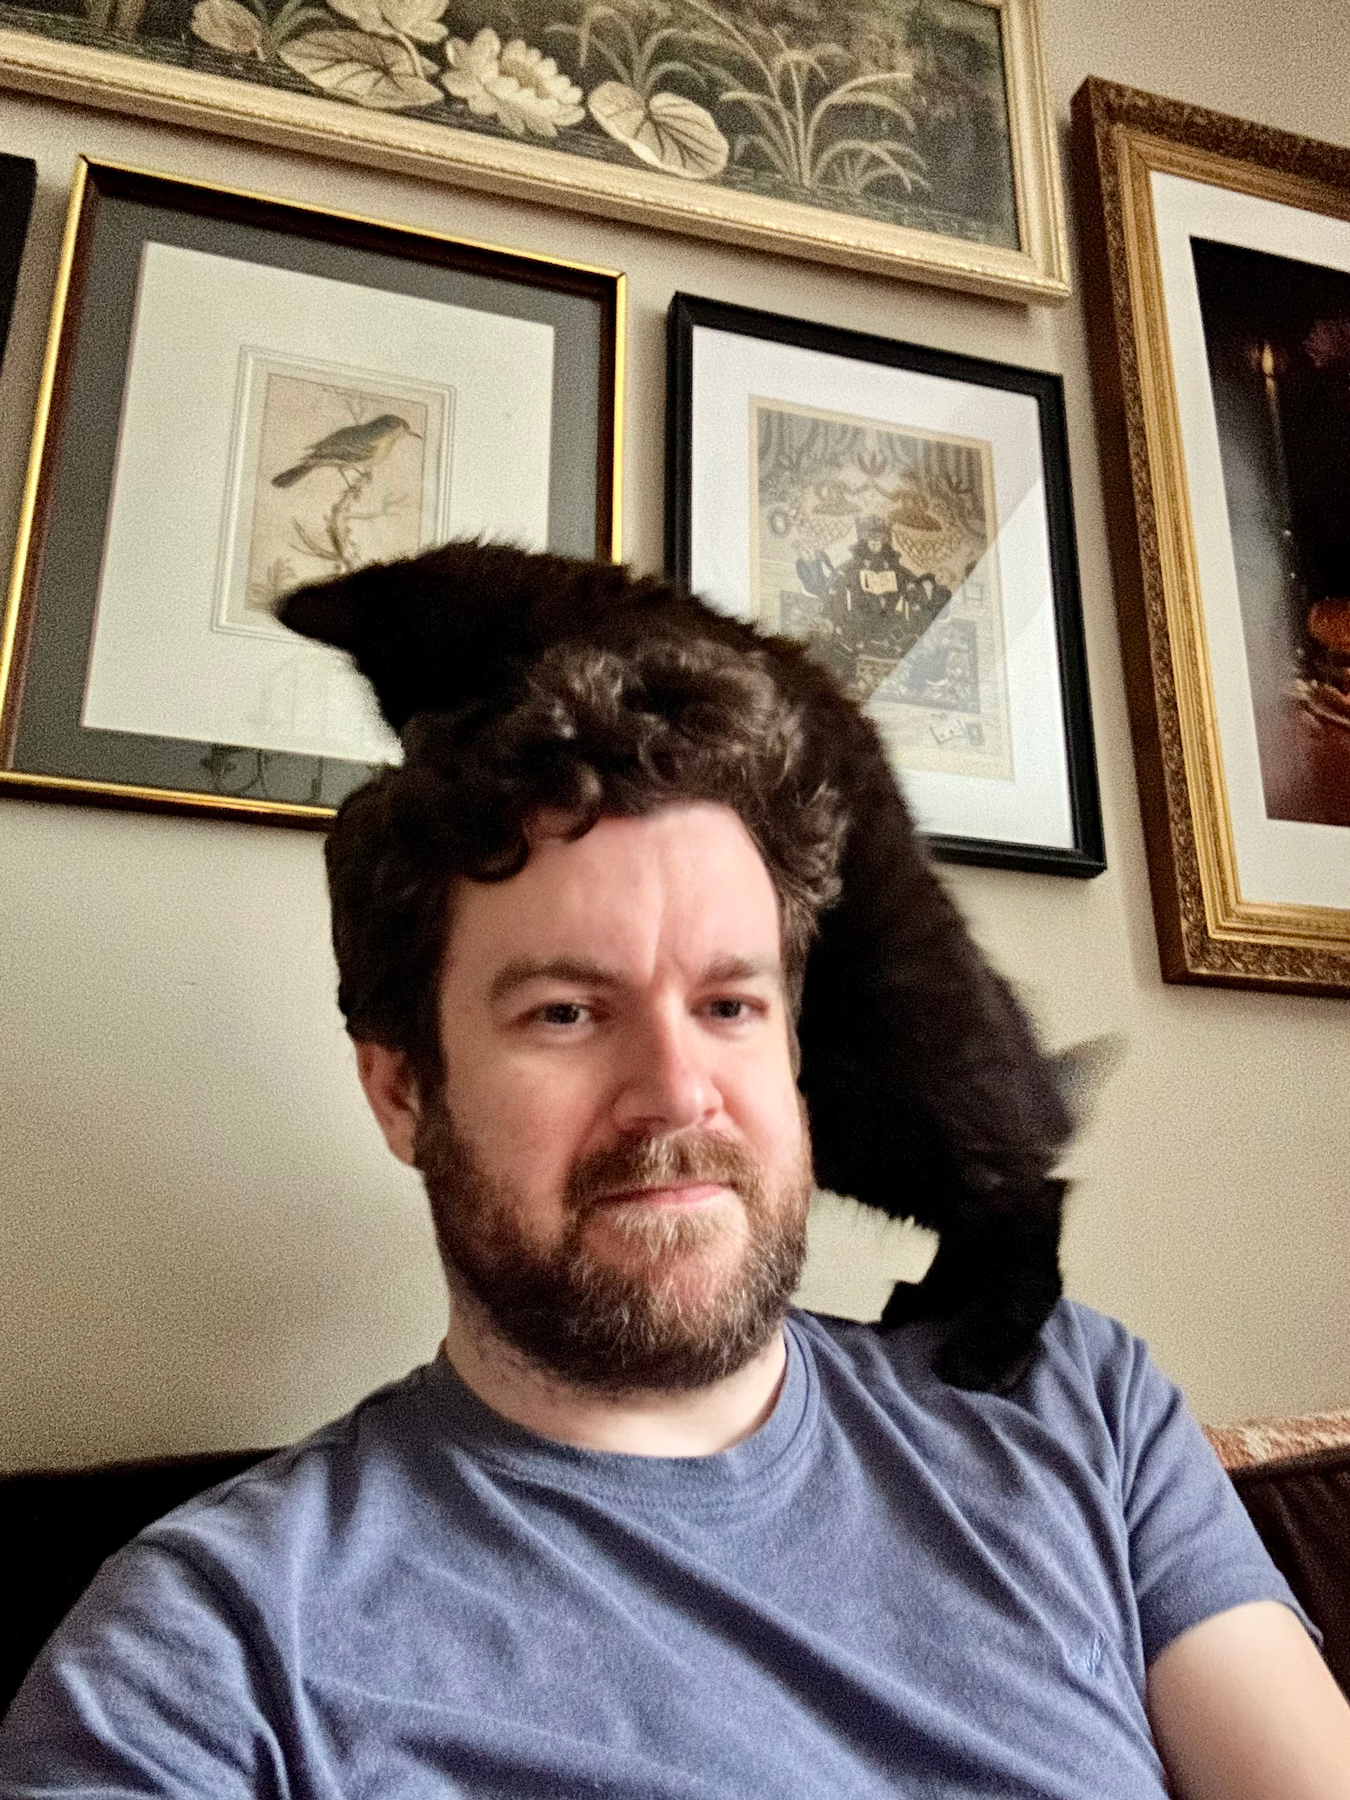 A kitten climbing on my head. I look slightly uncomfortable due to claws digging in